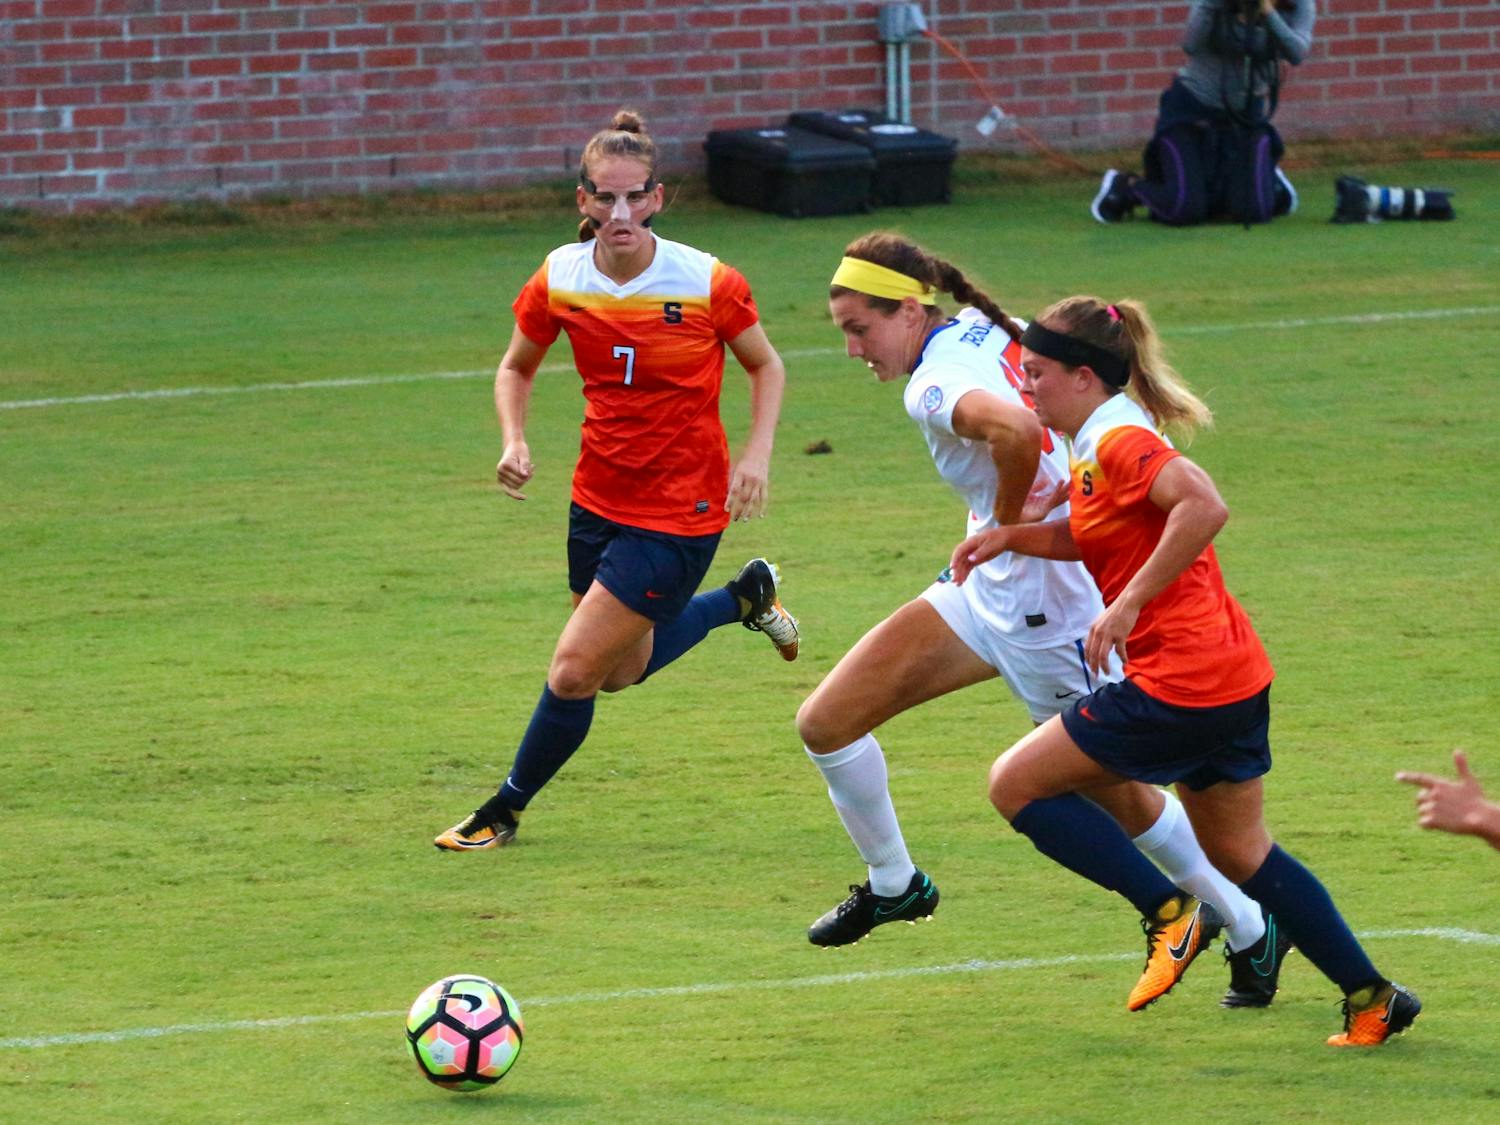 UF midfielder Sarah Troccoli scored her first goal of the season against Kentucky on Thursday in Daytona Beach. "It came at a good time because it was nice to go into the locker room with a lead instead of 0-0," coach Becky Burleigh said.